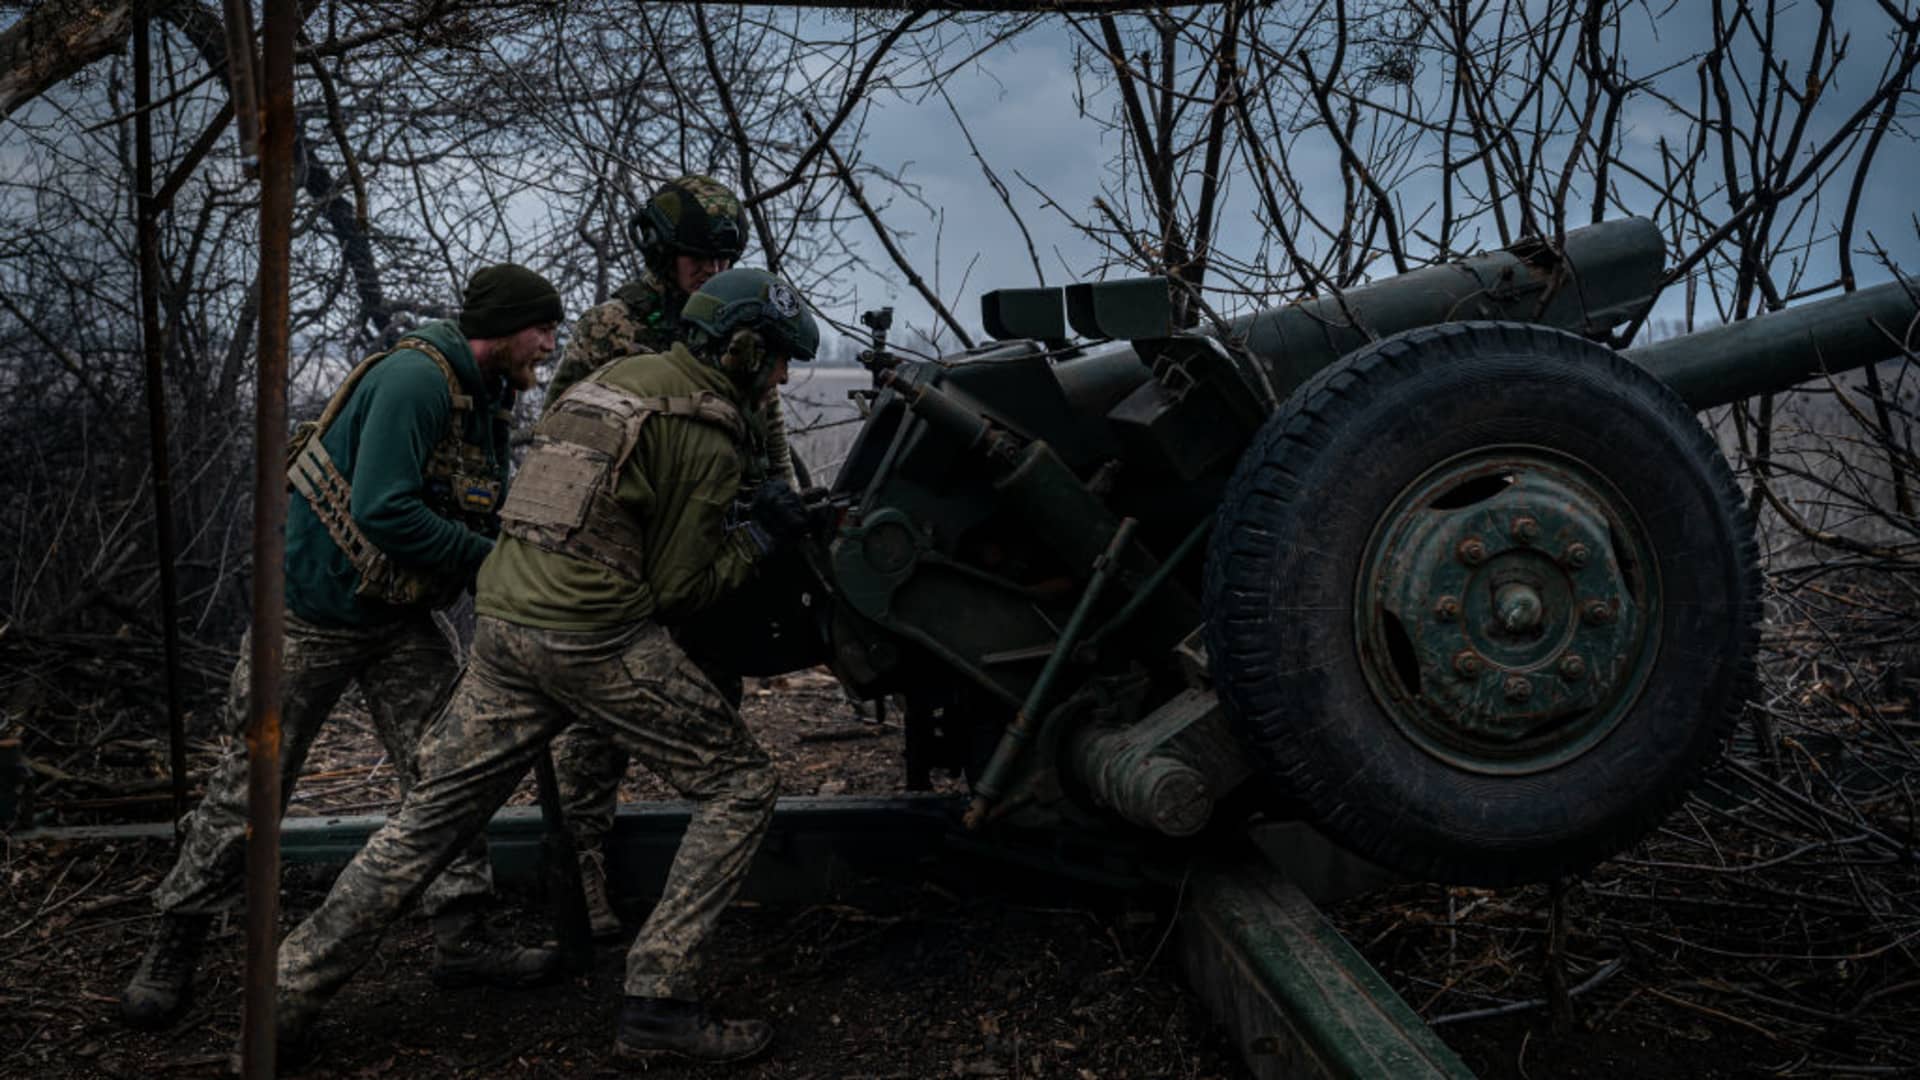 Ukrainian servicemen from the 10th Brigade aim a D-30 Howitzer towards Russian infantry along the frontline outside of Soledar, Ukraine on March 11, 2023.